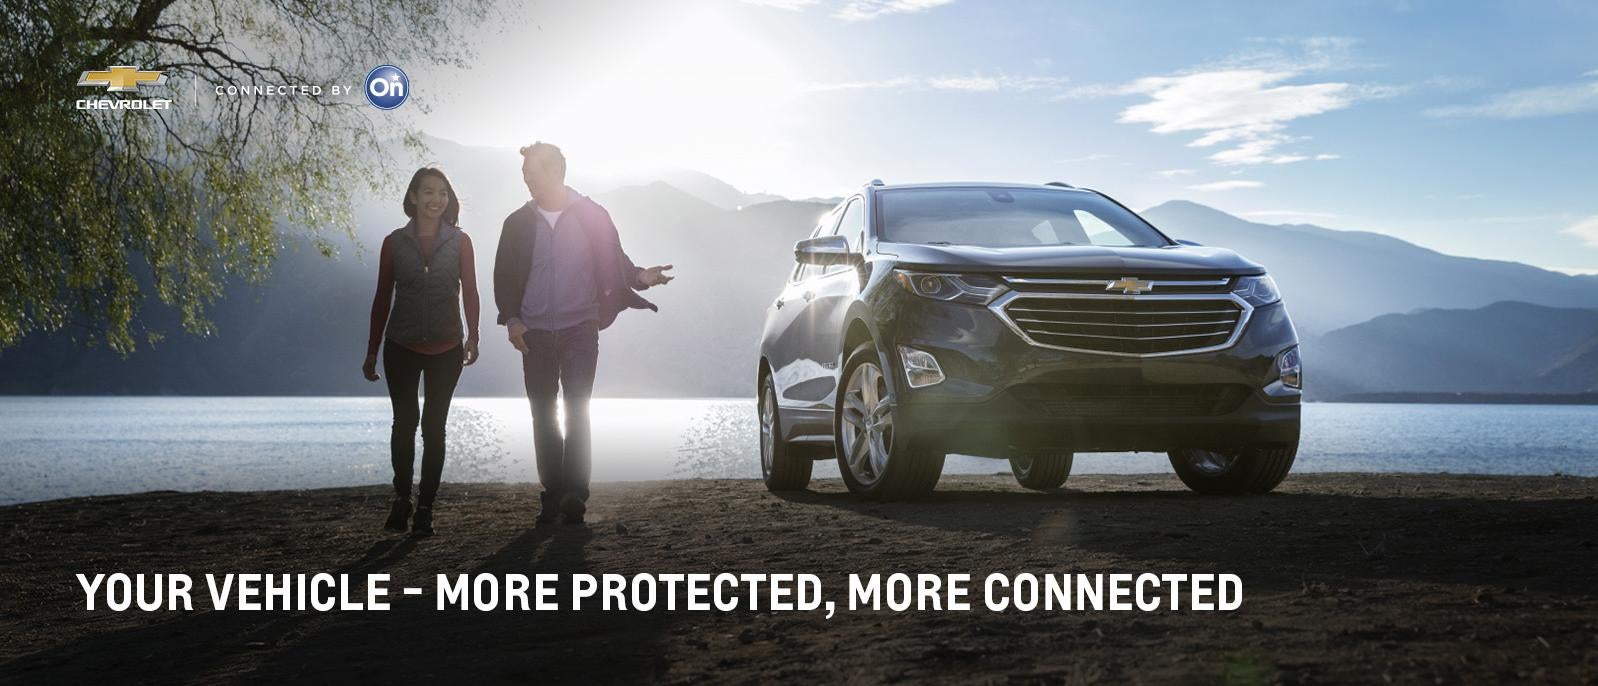 Your vehicle: more protected, more connected